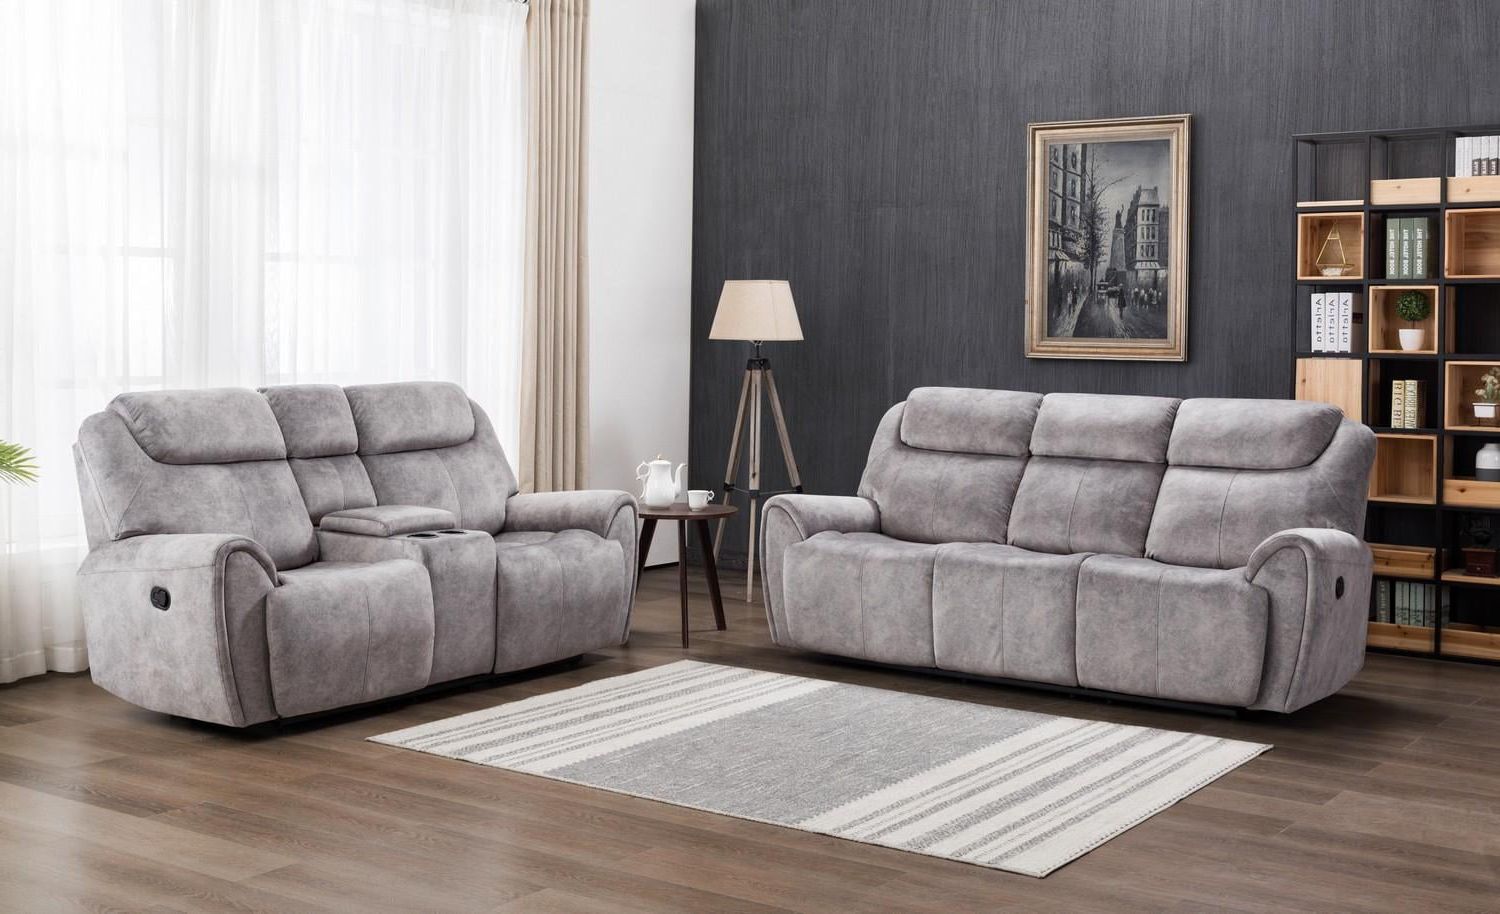 Gray Velvet Fabric Reclining Sofa & Loveseat Set Contemporary Global Intended For Modern Velvet Sofa Recliners With Storage (Gallery 8 of 20)